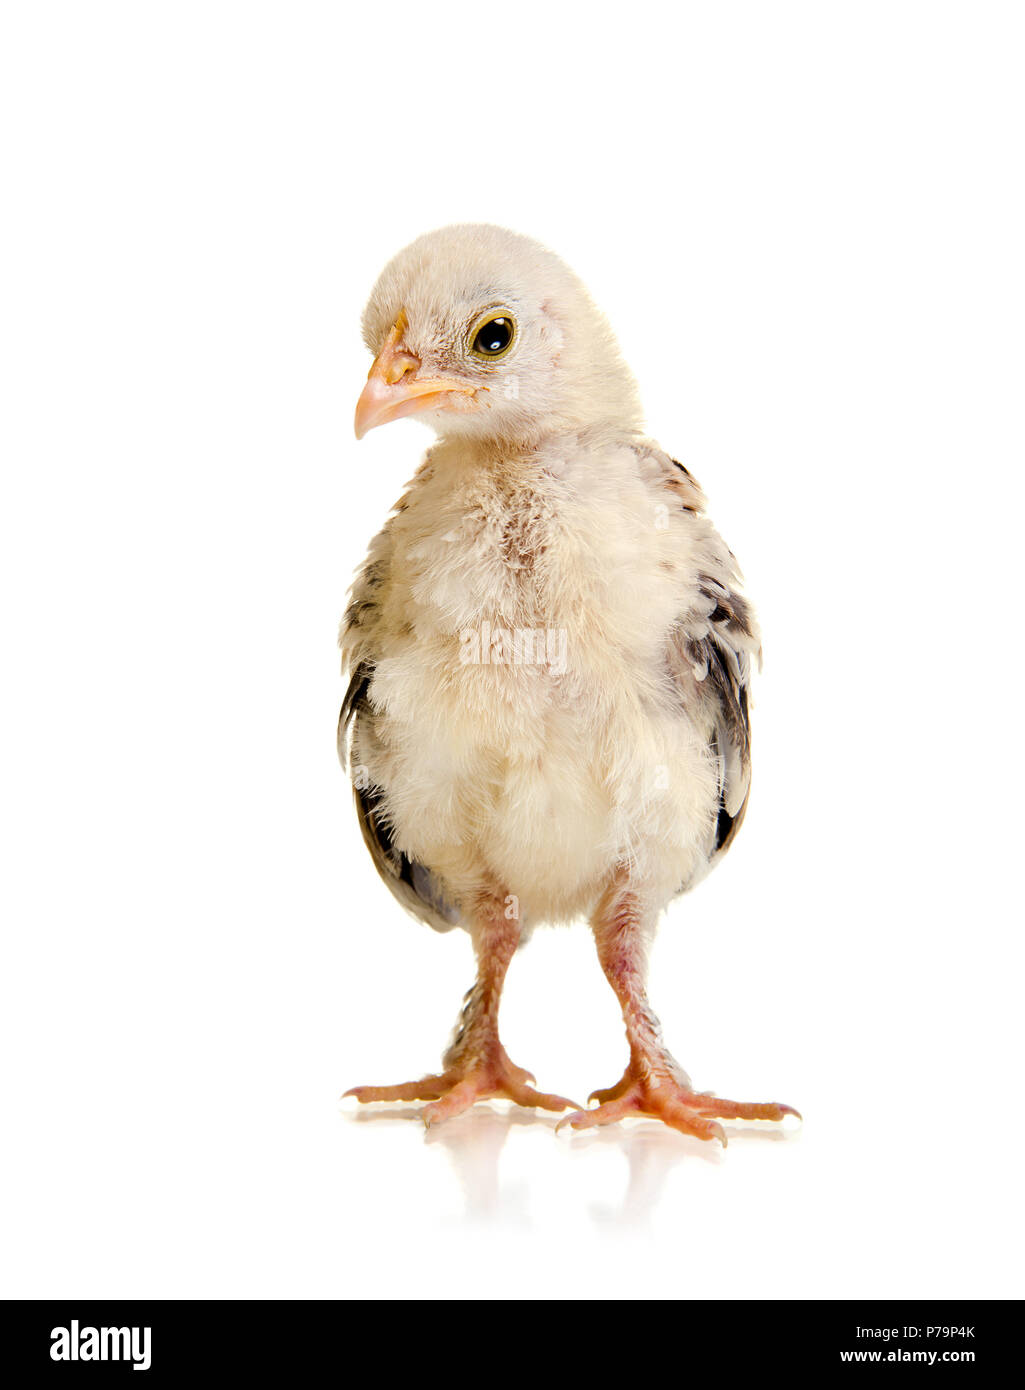 one  chick stand on white background, isolated, close up Stock Photo